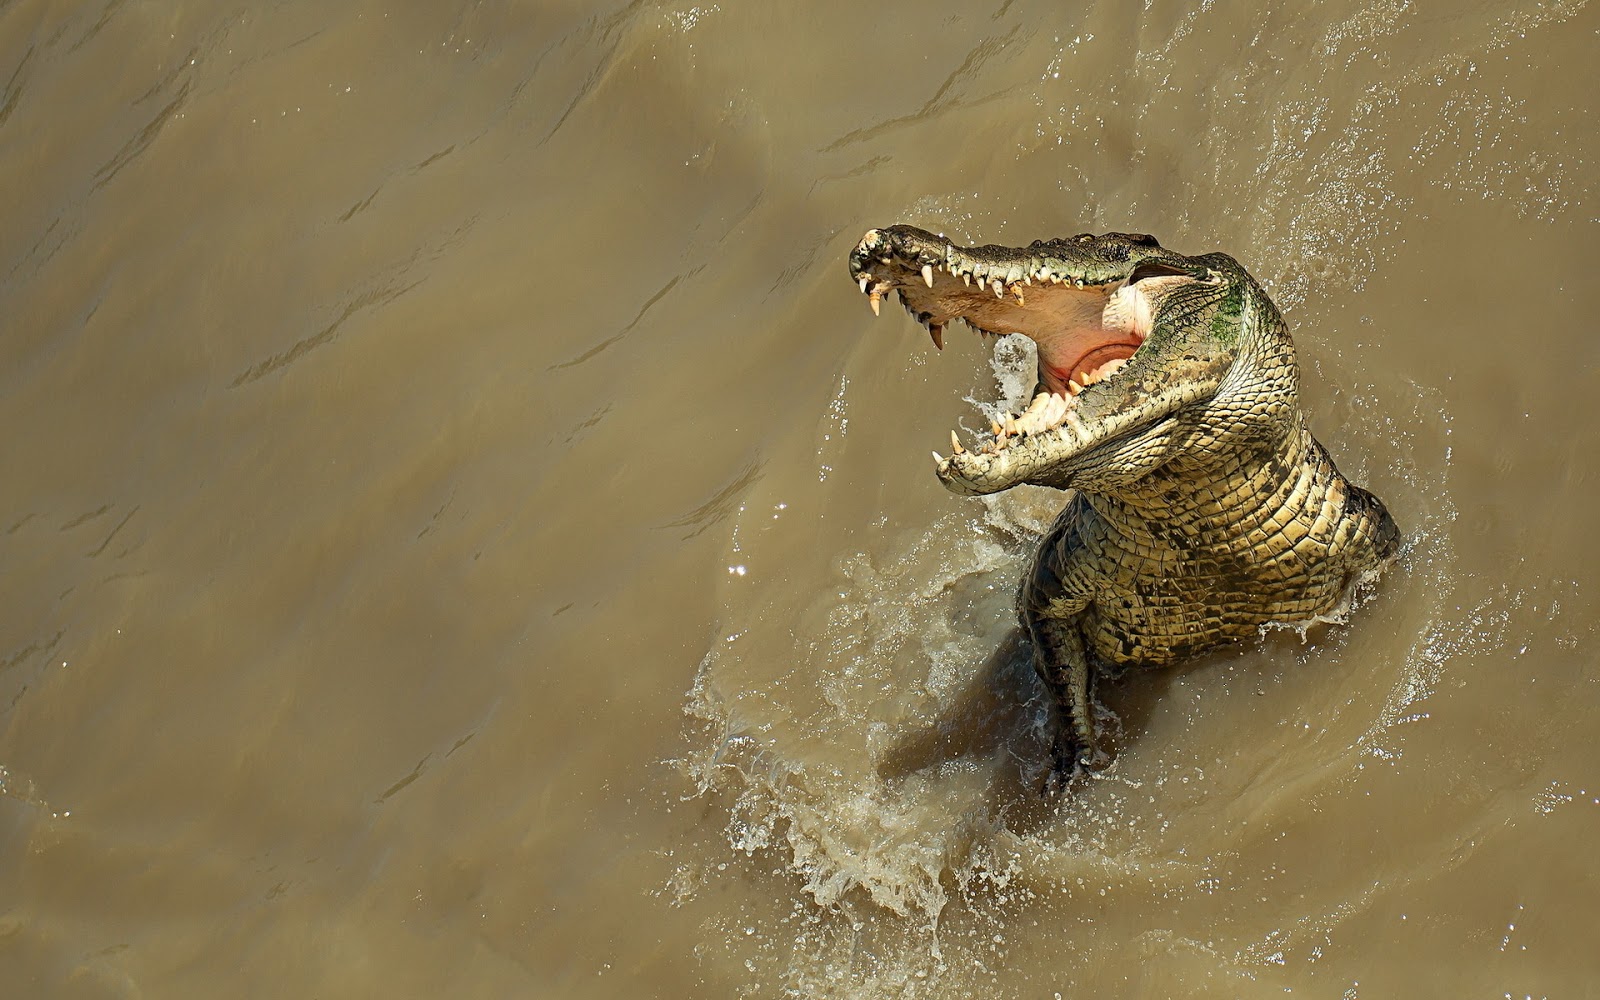 Crocodile standard 4:3 wallpapers hd, desktop backgrounds 1280x960, images  and pictures